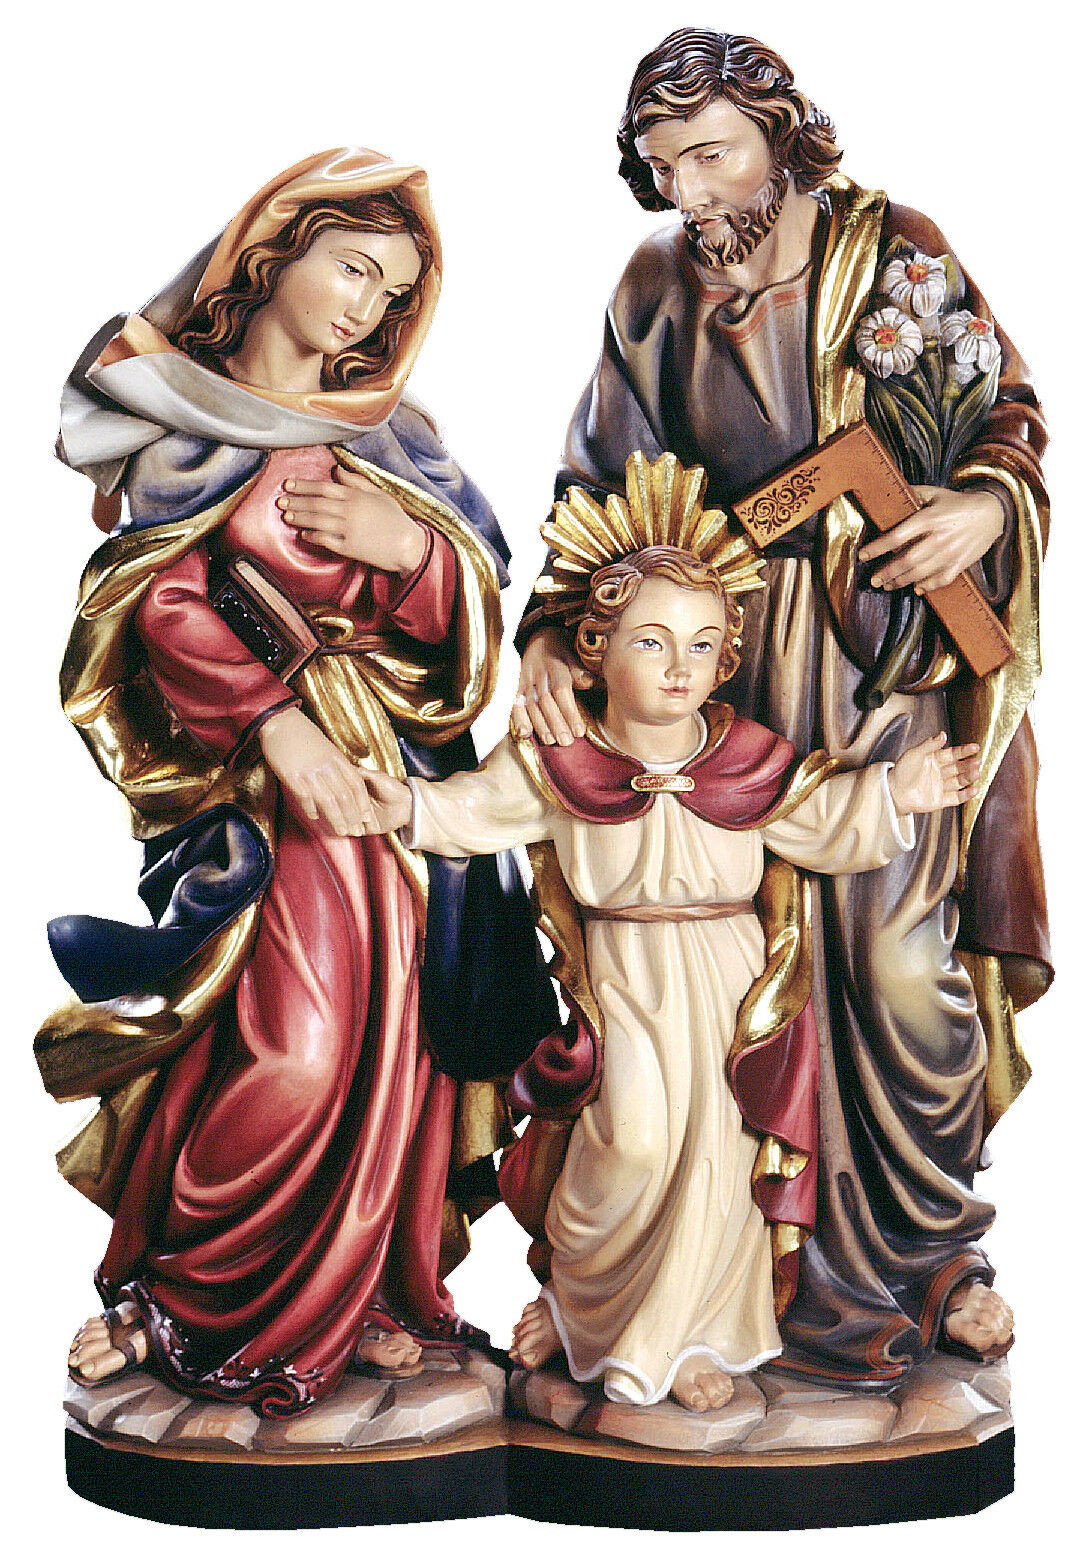 Stupenda SculturaSACRA FAMIGLIA IN LEGNO<br />- HOLY FAMILY WOOD-CARVED STATUE<br />LEGNO SCOLPITO - WOODCARVING<br /> Nuovo. New SCOLPITA A DIPINTA A MANO CON COLORI AD OLIO- HANDMADE WOOD CARVED AND PAITEND WITH OIL COLORS